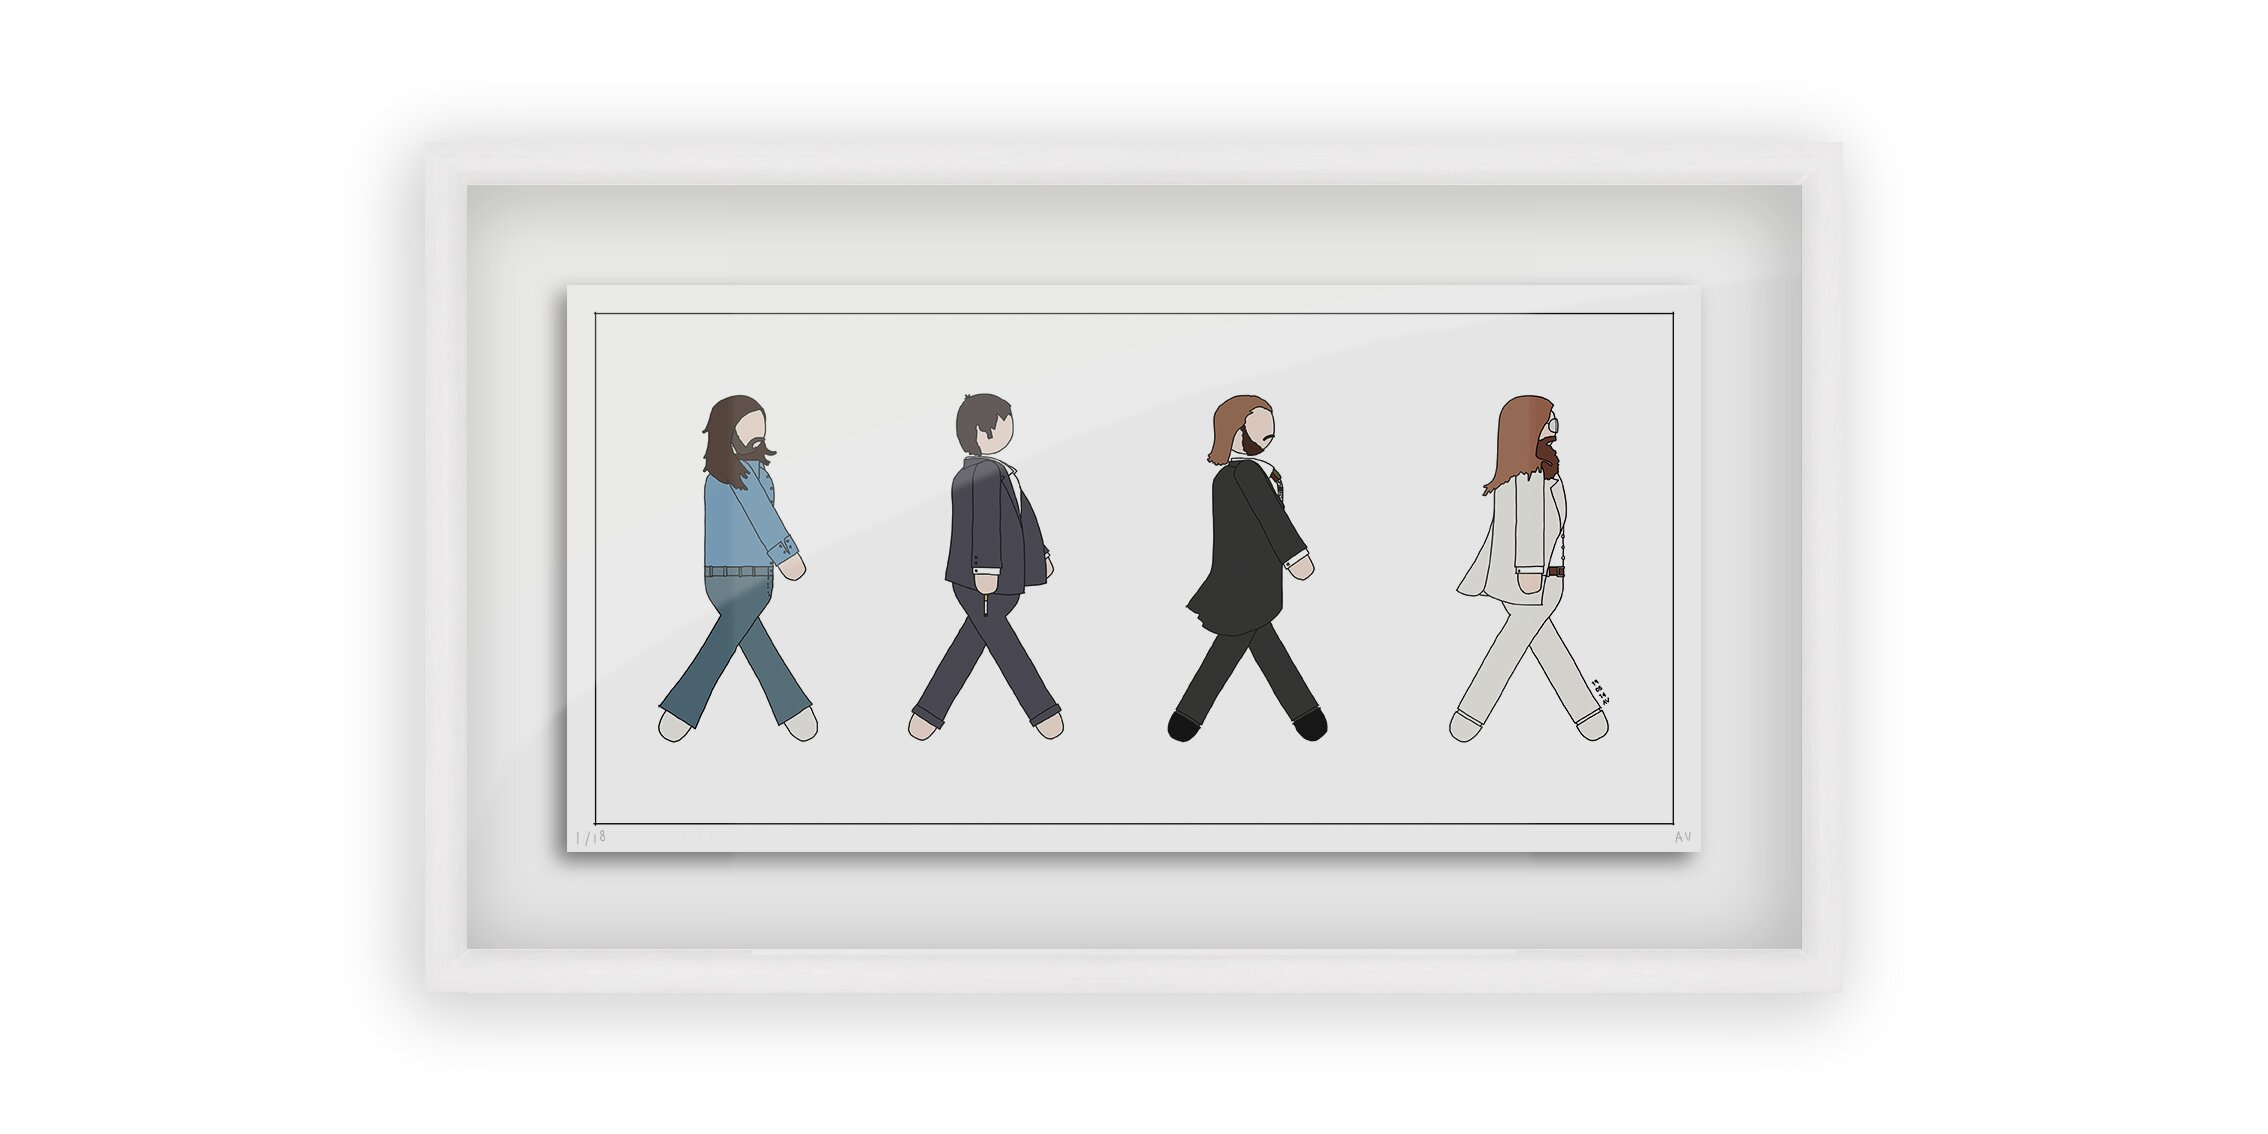 Beatles-Abbey-Road-Persona-Art-Project-Ant-Vervoort-Hand-Drawing